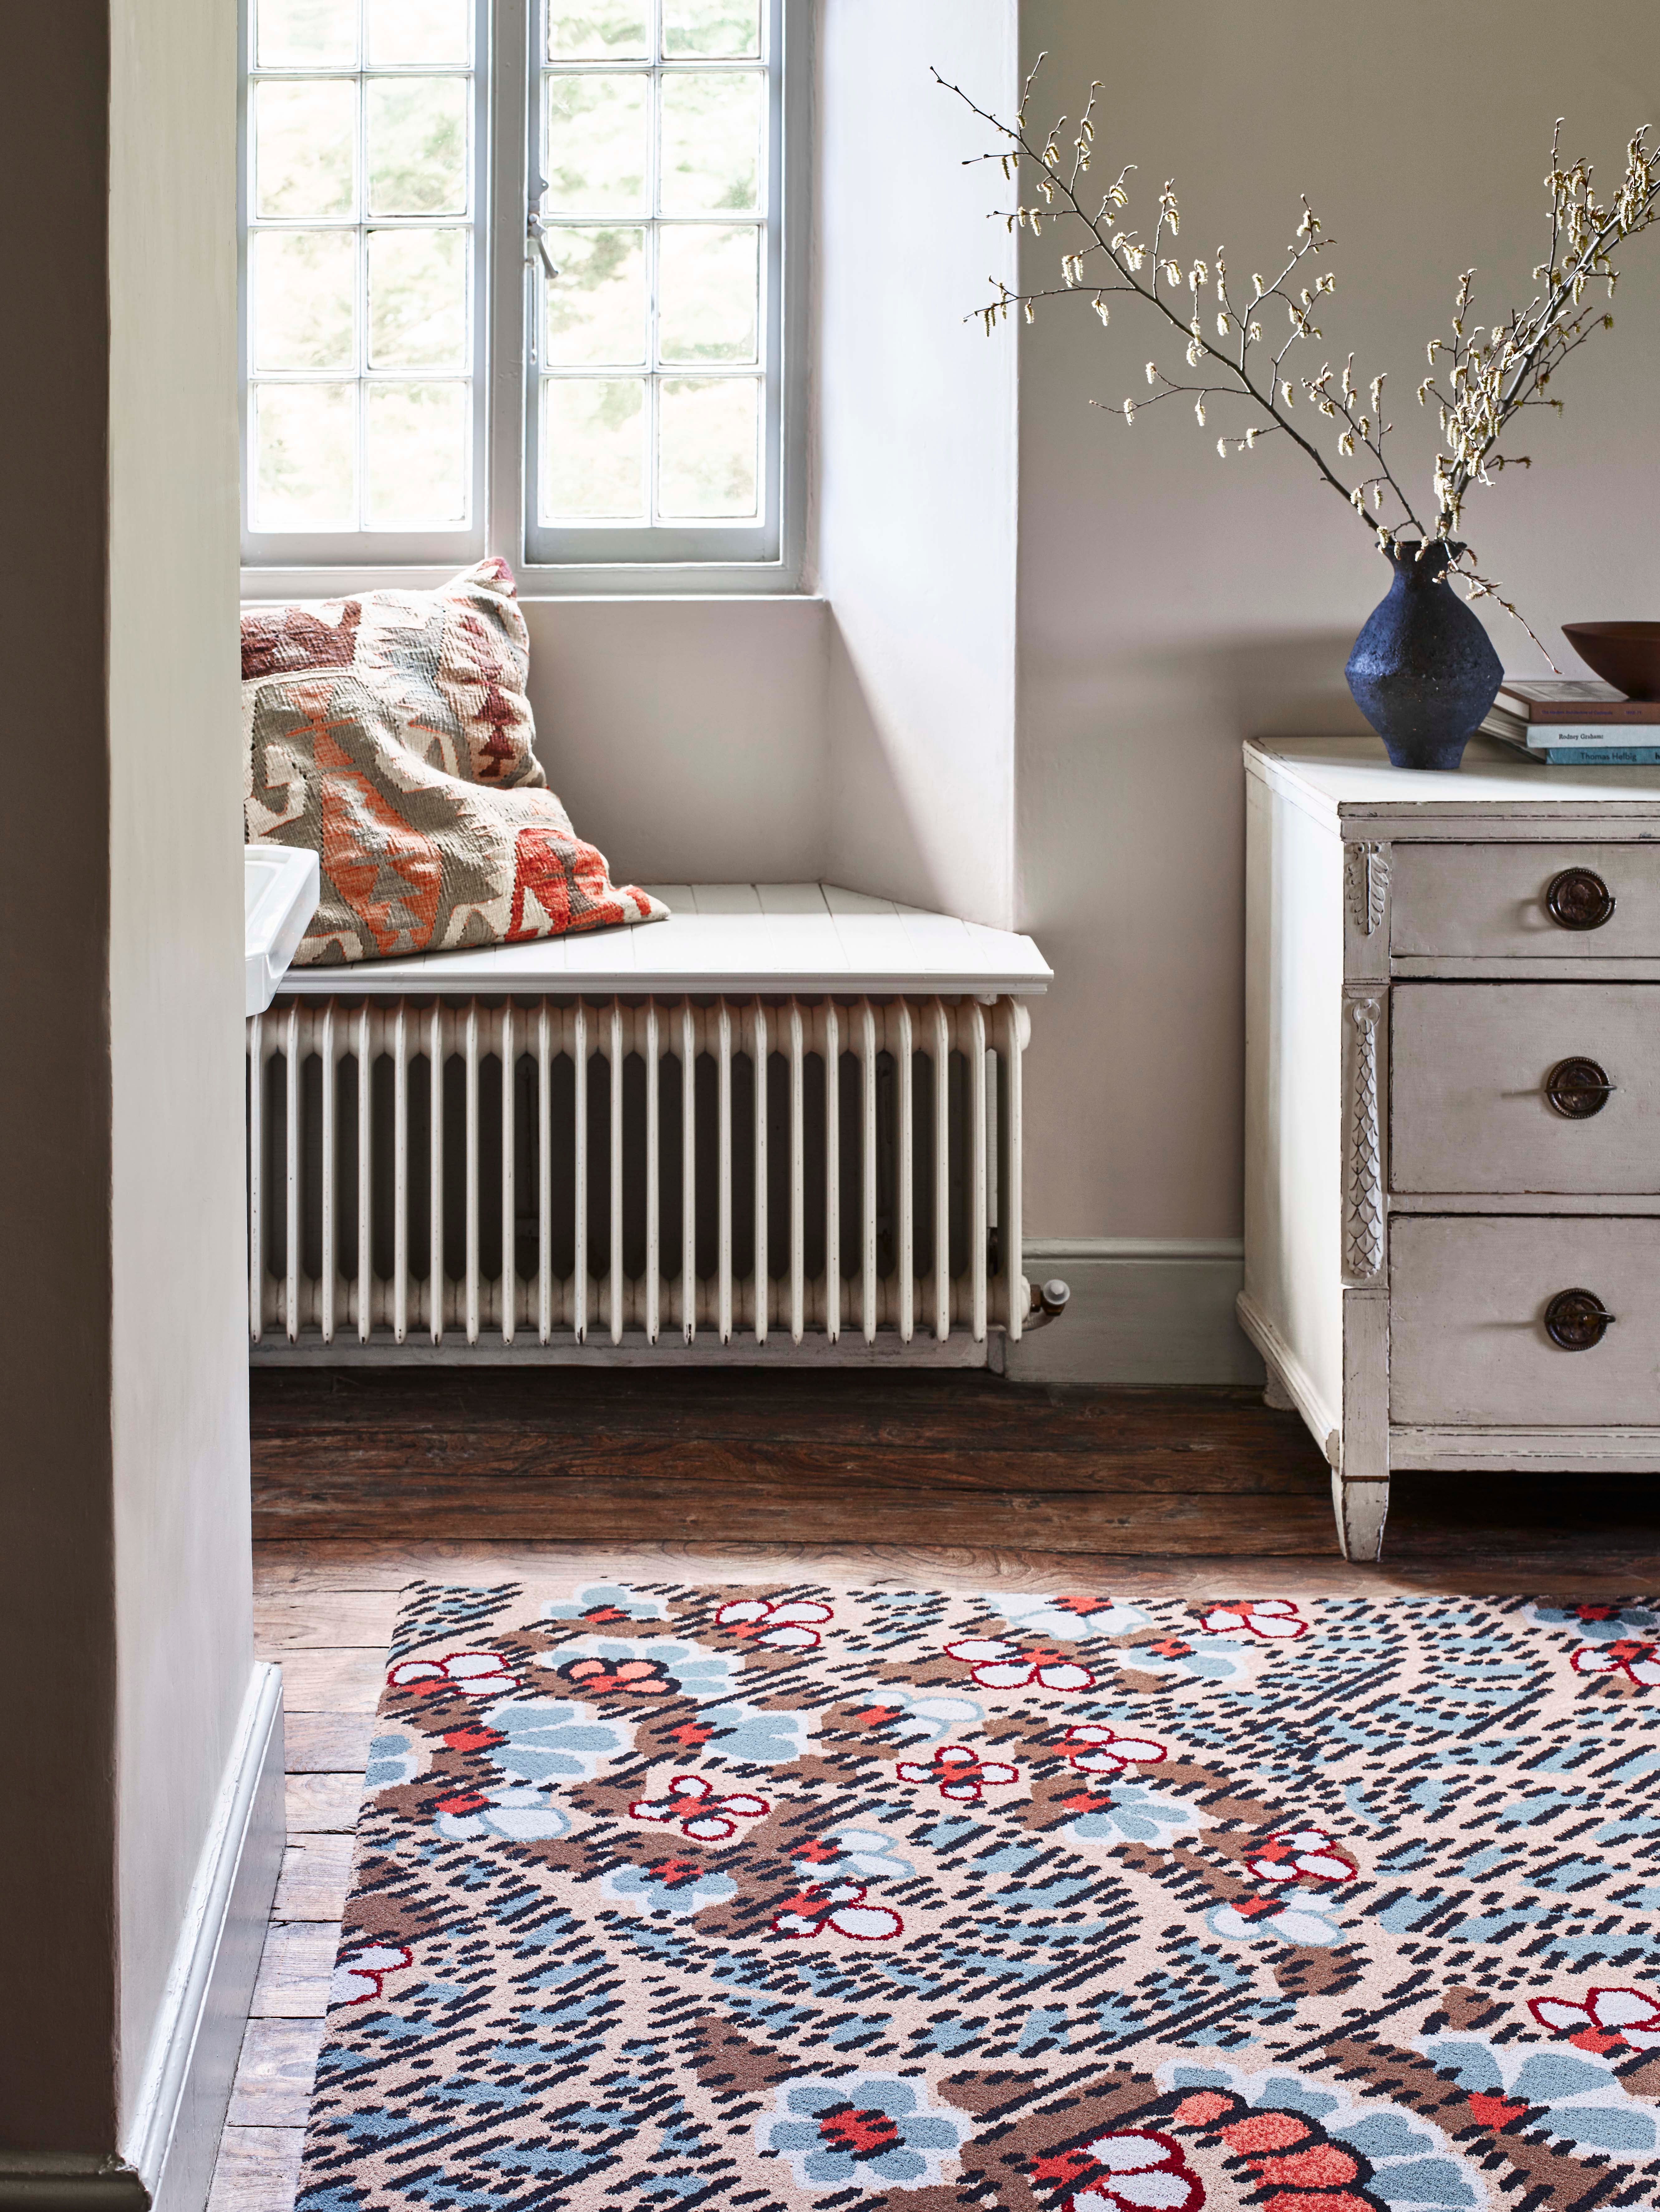 A patterned carpet provides a great point from which to develop a room’s palette